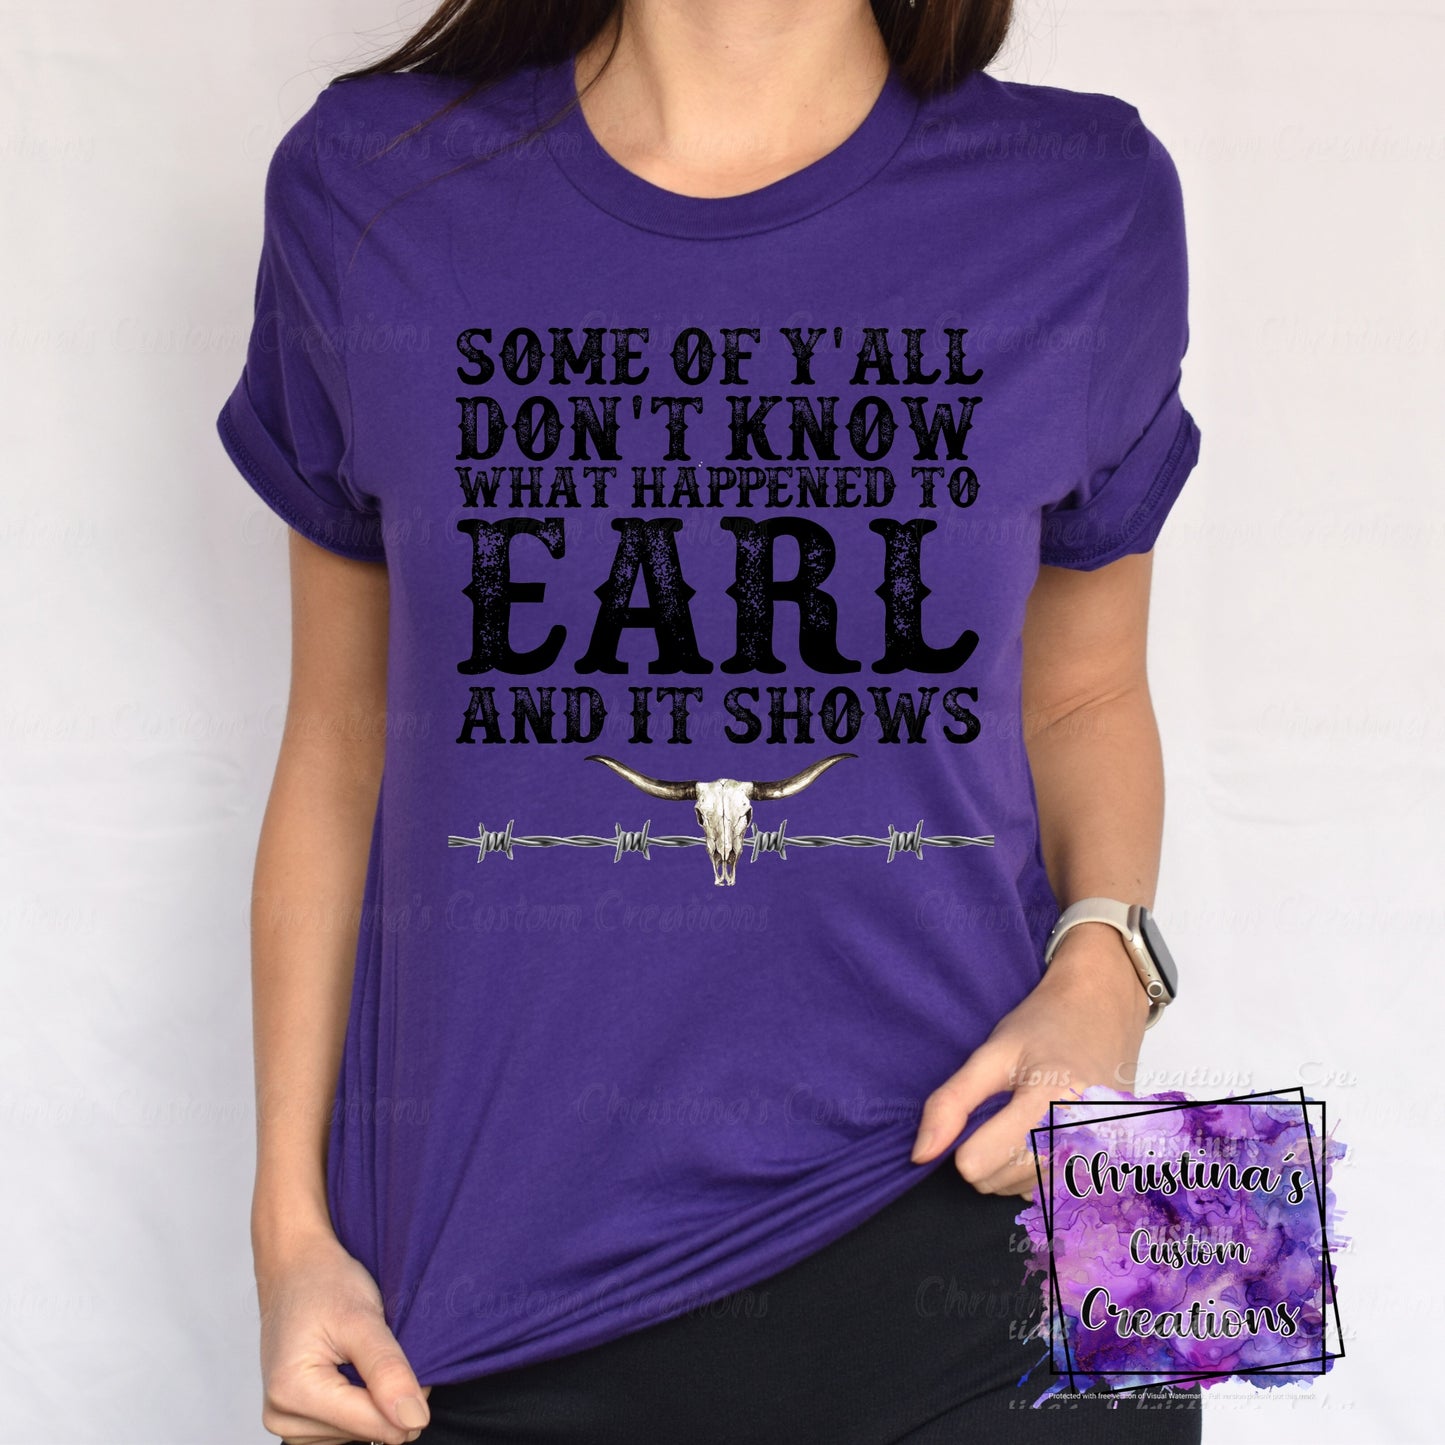 Some of Y'all Don't Know Earl T-Shirt | Trendy Country Music Shirt | Fast Shipping | Super Soft Shirts for Men/Women/Kid's